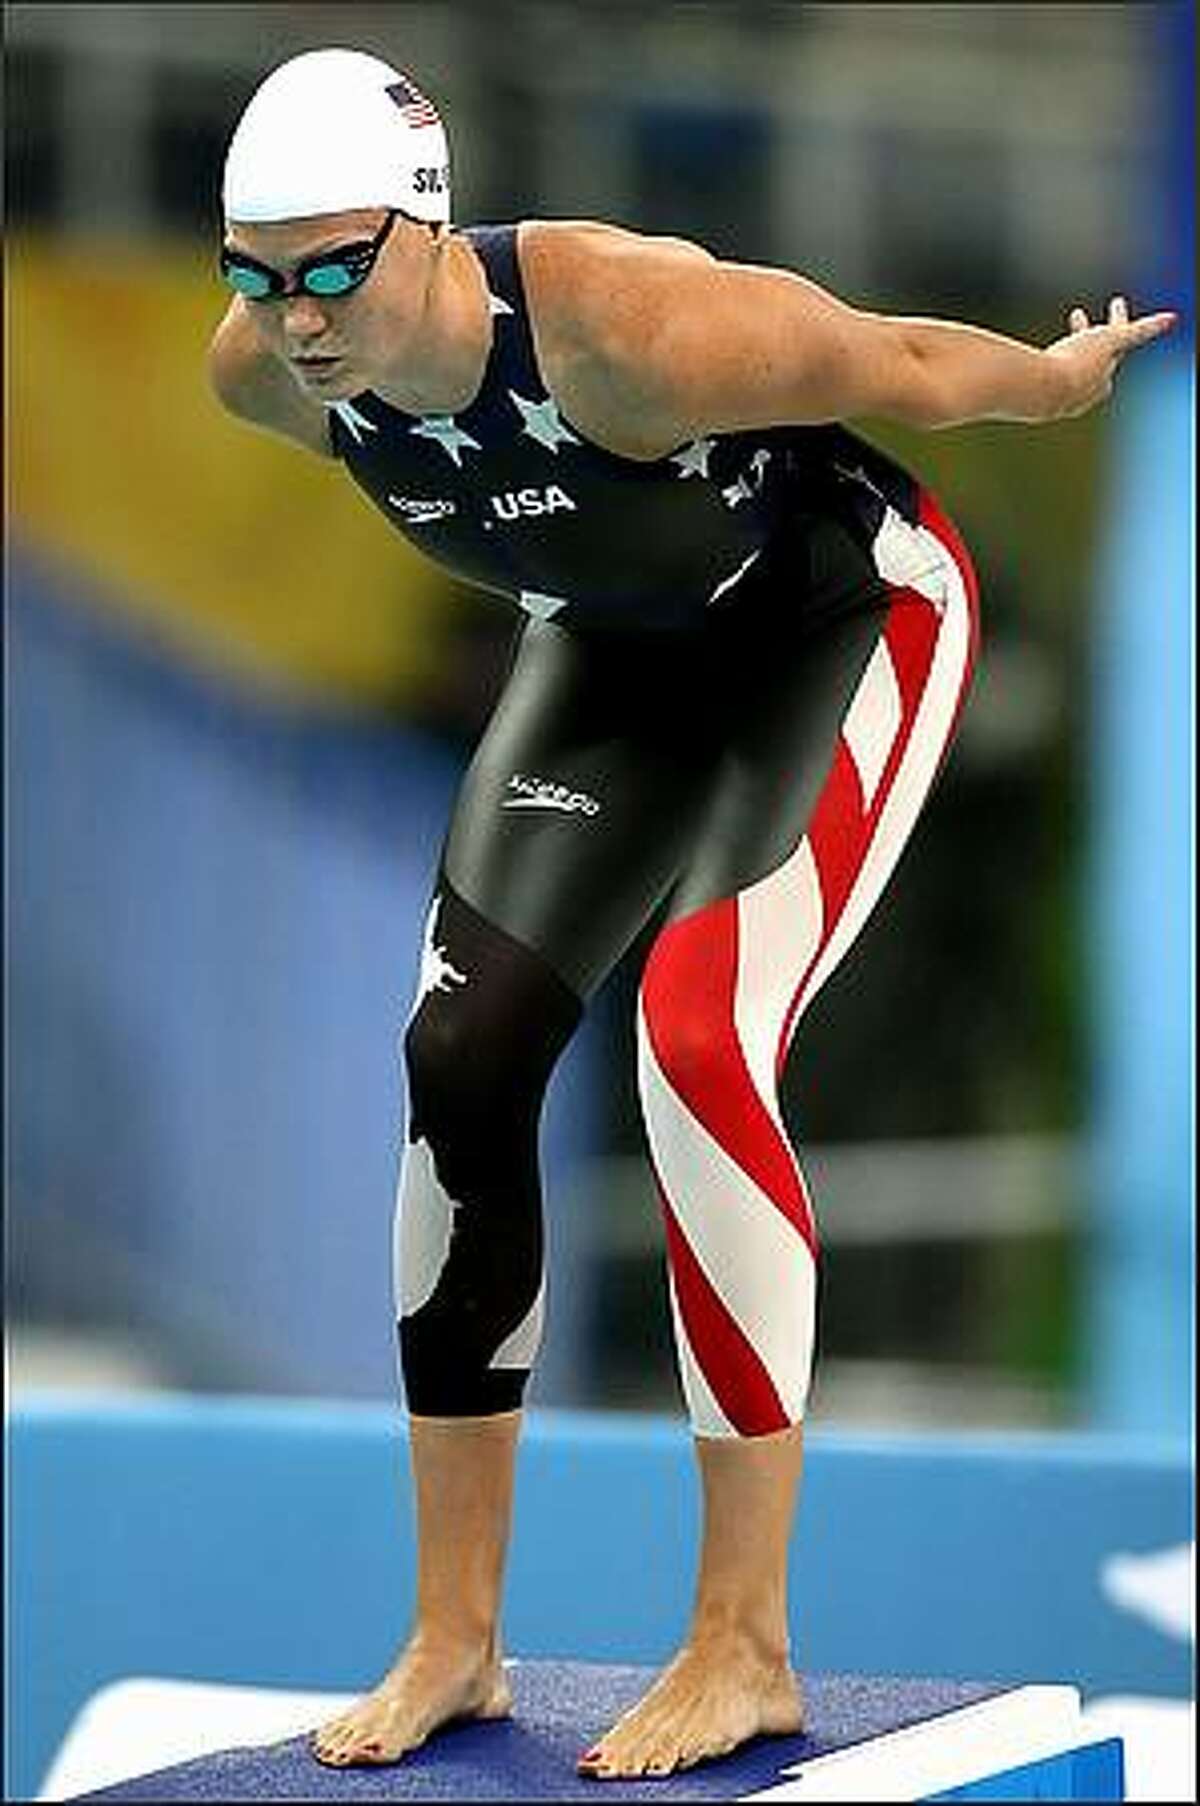 Emily Silver of the United States competes in the Women's 4x100m Freestyle Relay Heat 2 held at the National Aquatics Center during Day 1 of the Beijing 2008 Olympic Games in Beijing, China.